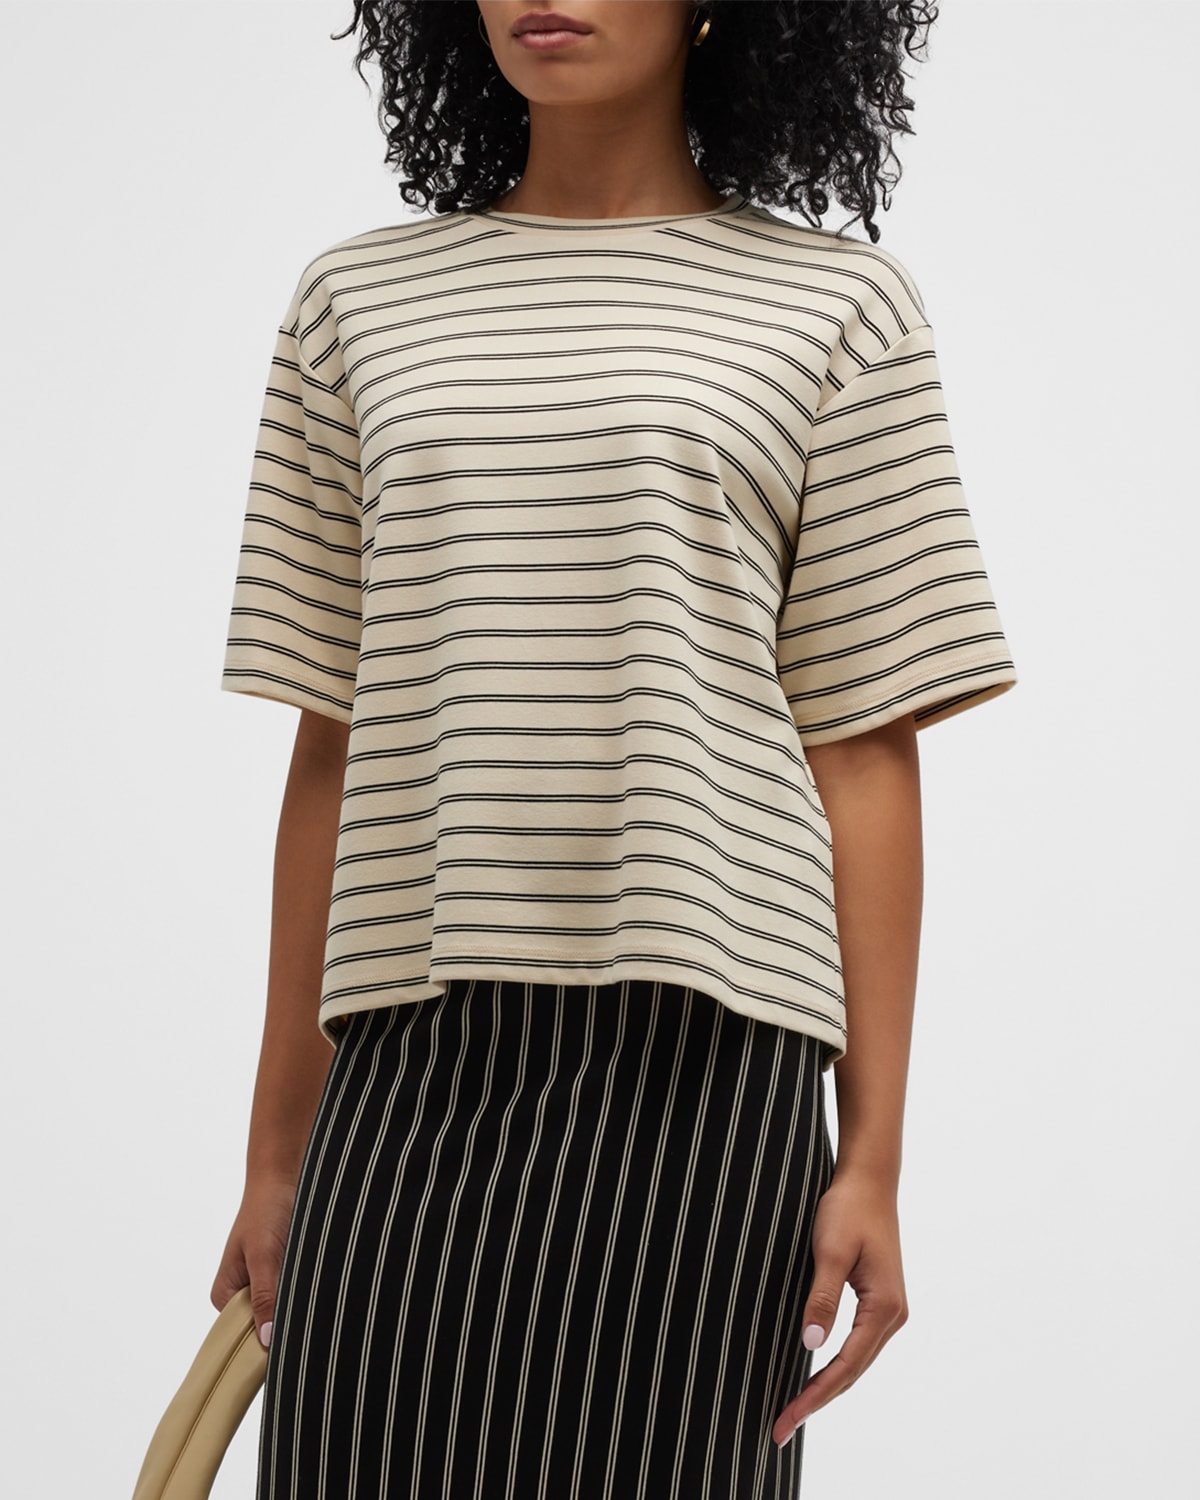 Afone Striped Short-Sleeve Top